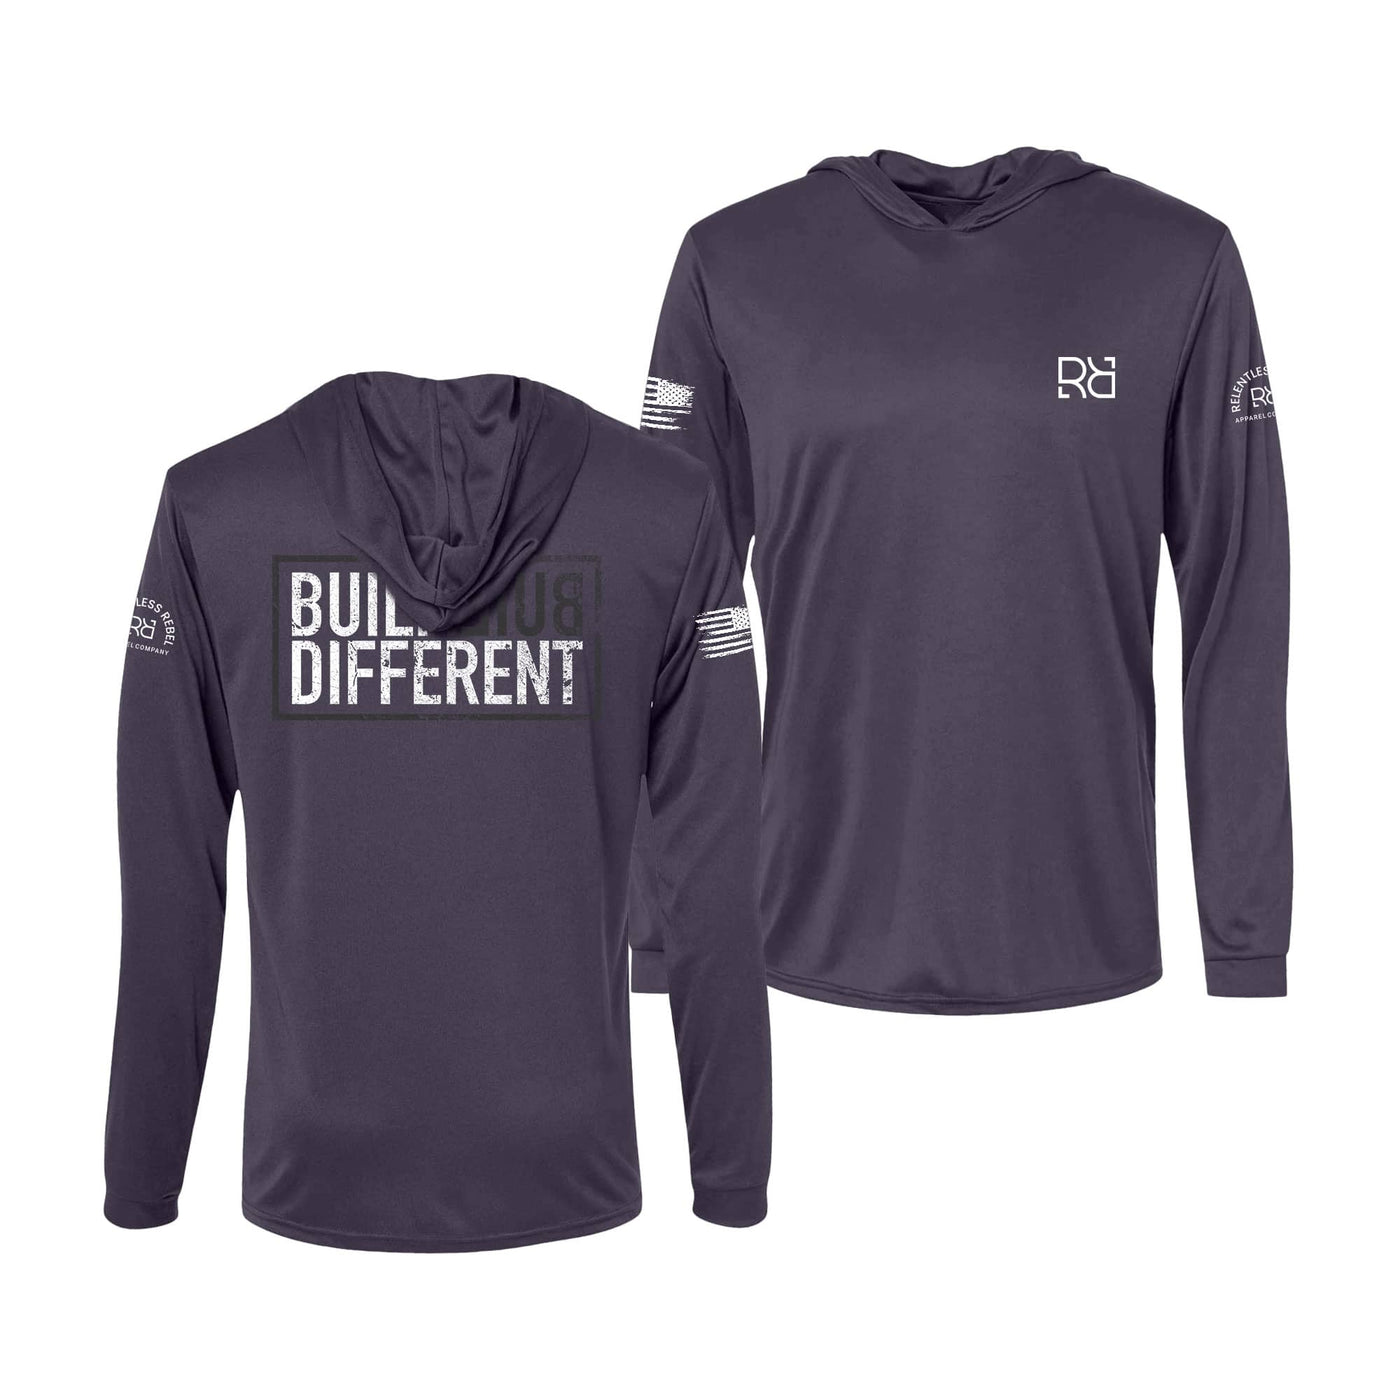 Built Different | Men's Dry Fit Hooded Long Sleeve | UPF50 Graphite